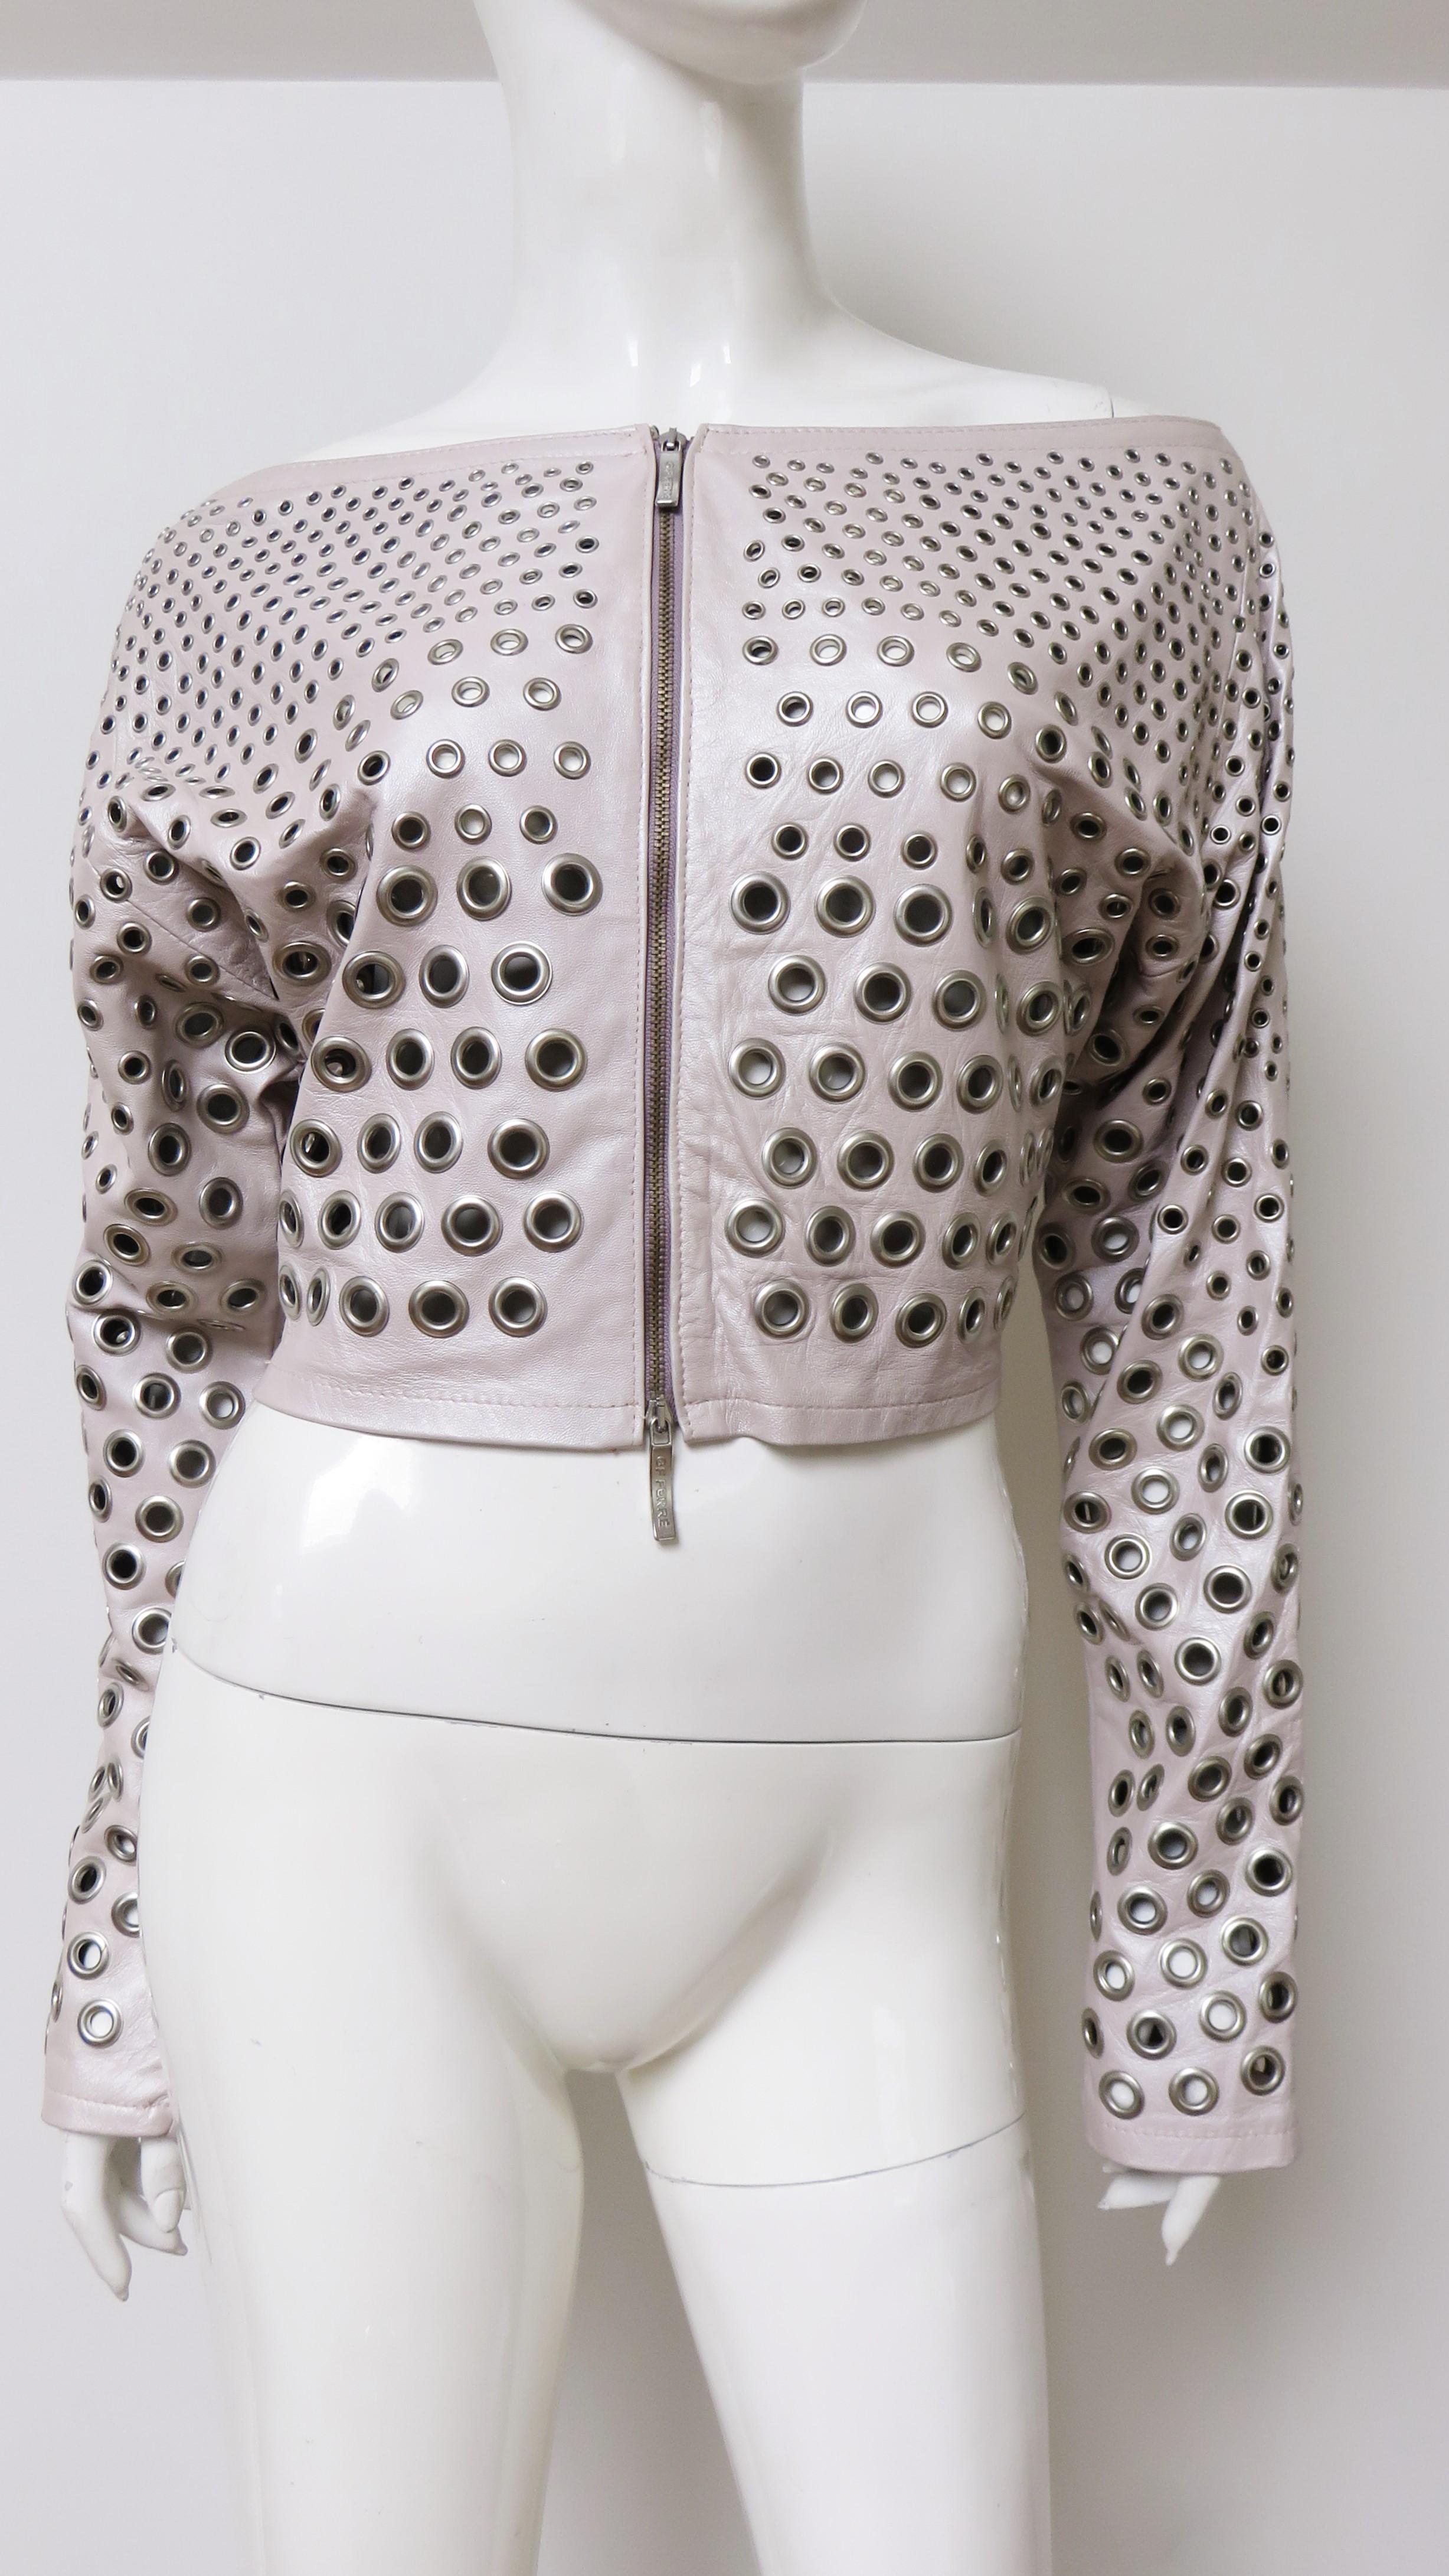 A fabulous shell pink leather crop jacket by Gianfranco Ferre.  It has a bateau neckline, long sleeves, and is covered in rows of silver gradating grommets smaller in size at the top of the jacket increasing in size towards the hem.  There is a